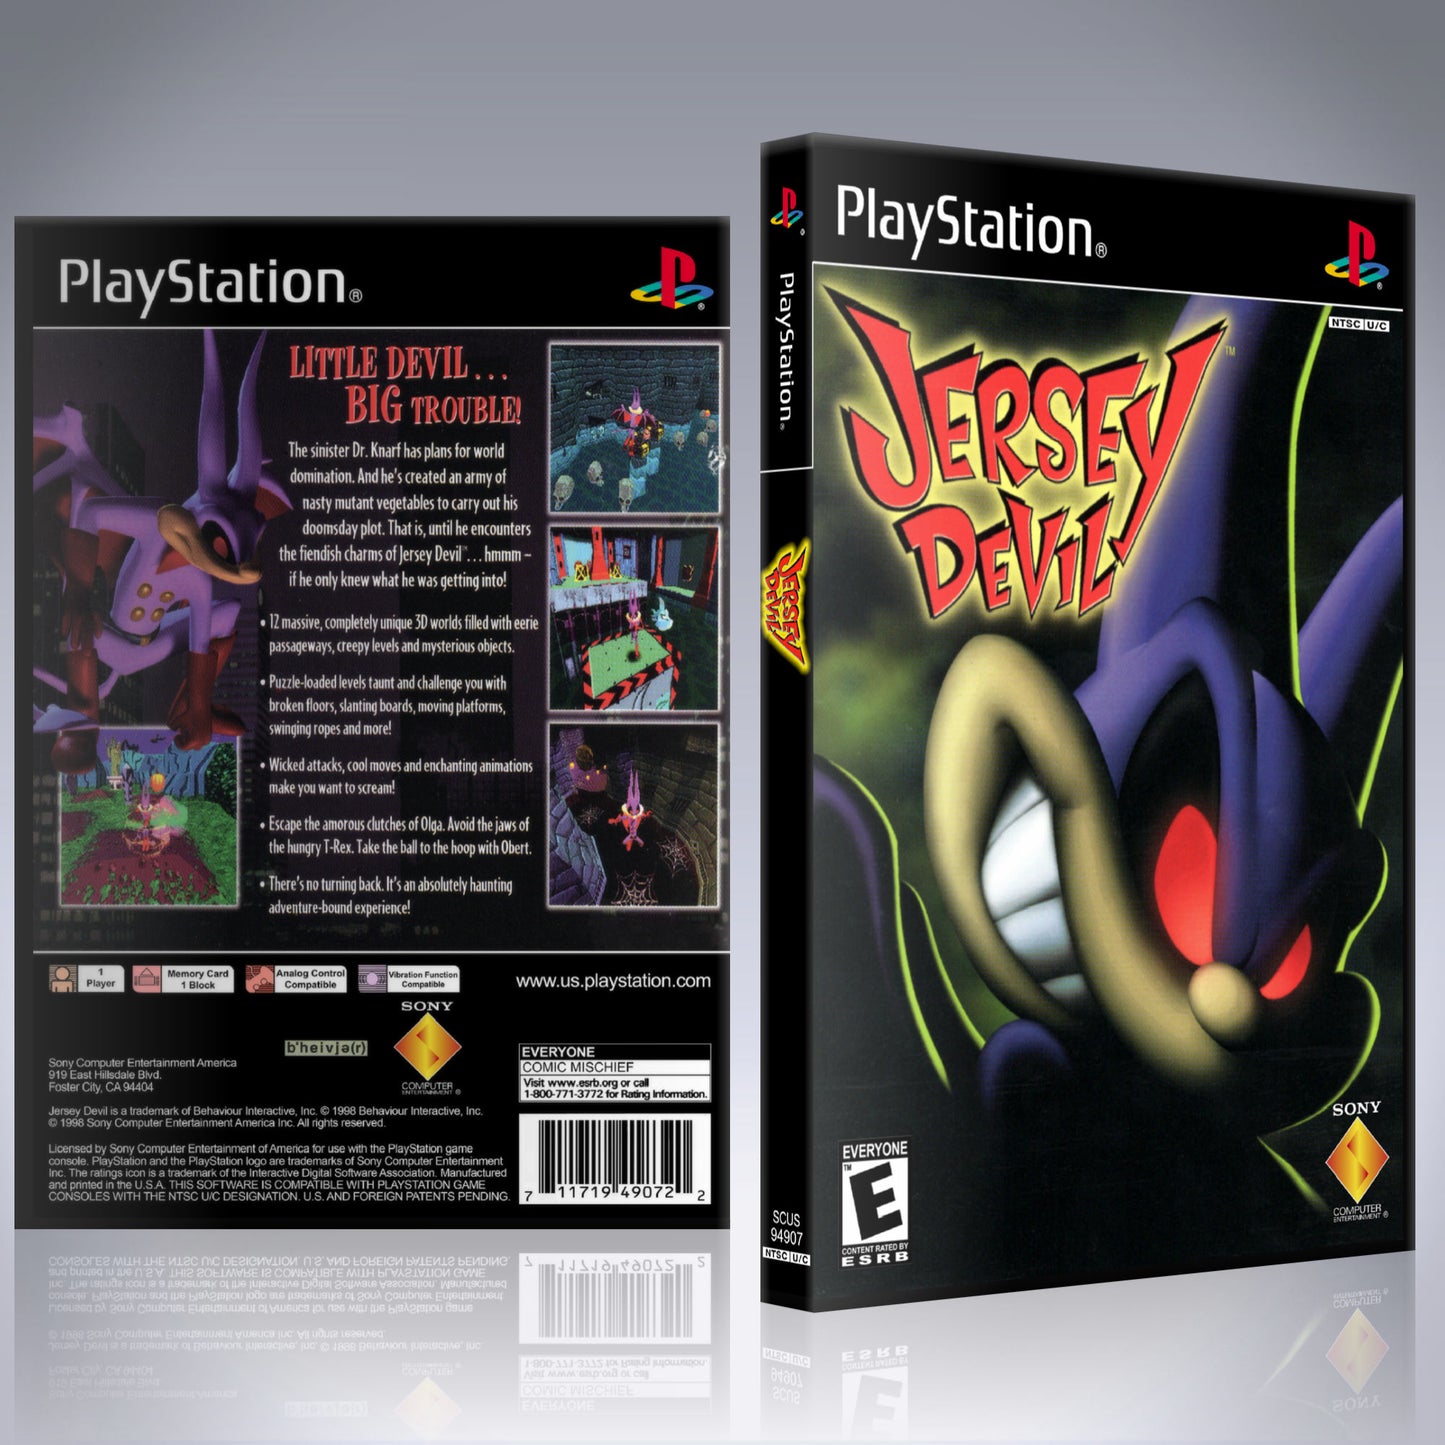 PS1 Case - NO GAME - Jersey Devil